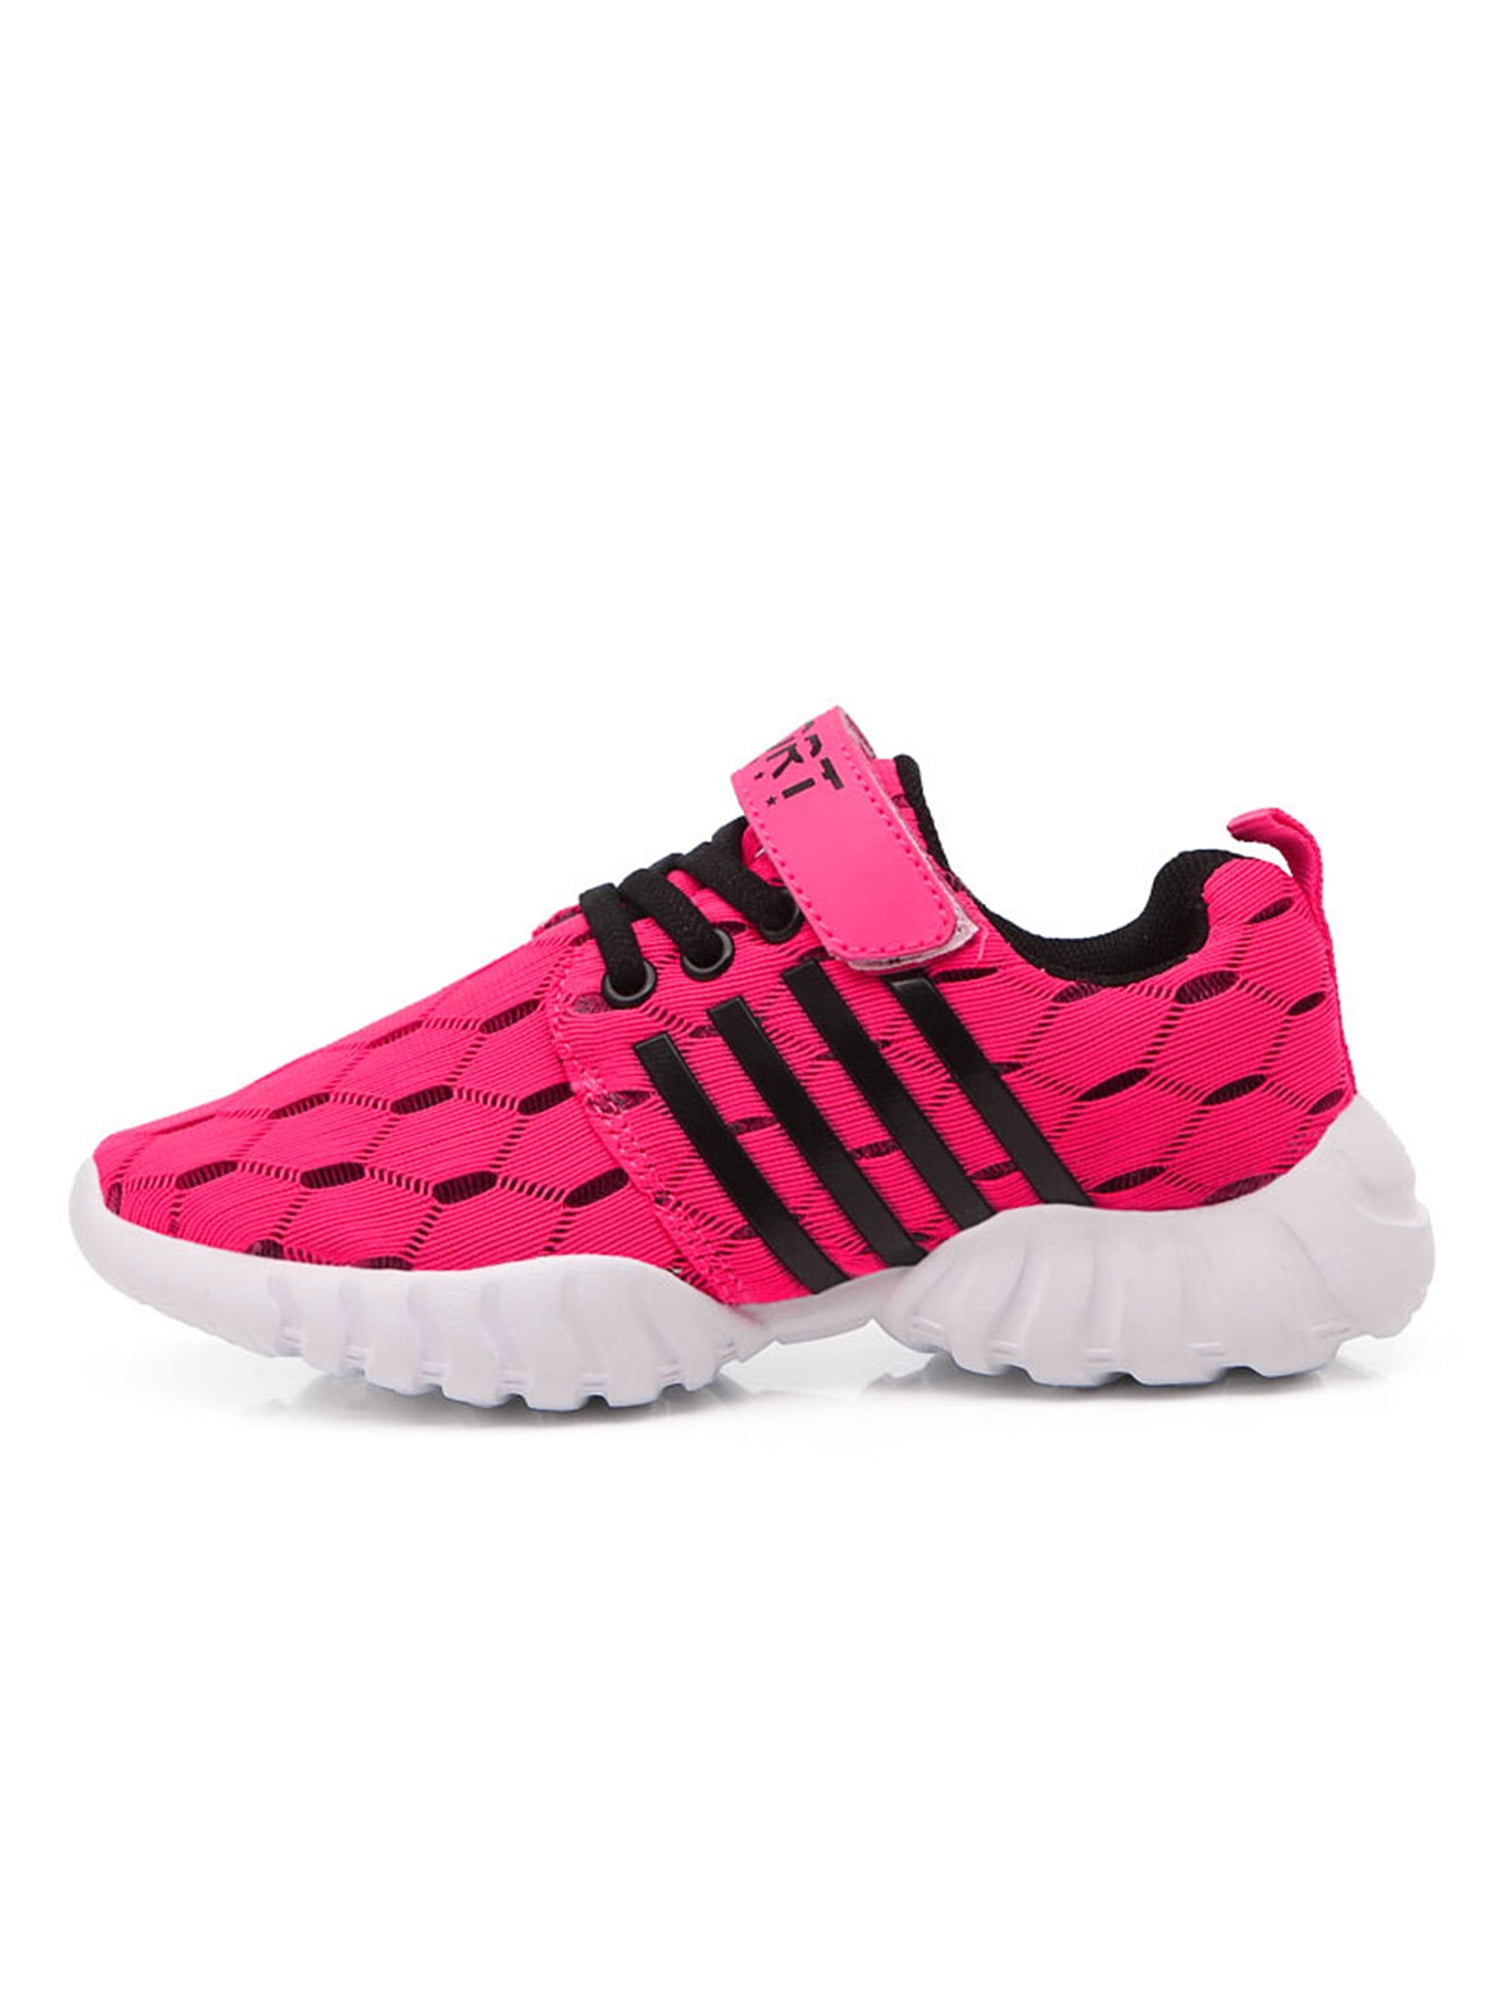 Kids Tennis Shoes Walking Shoes Fashion Sneakers for Boys and Girls